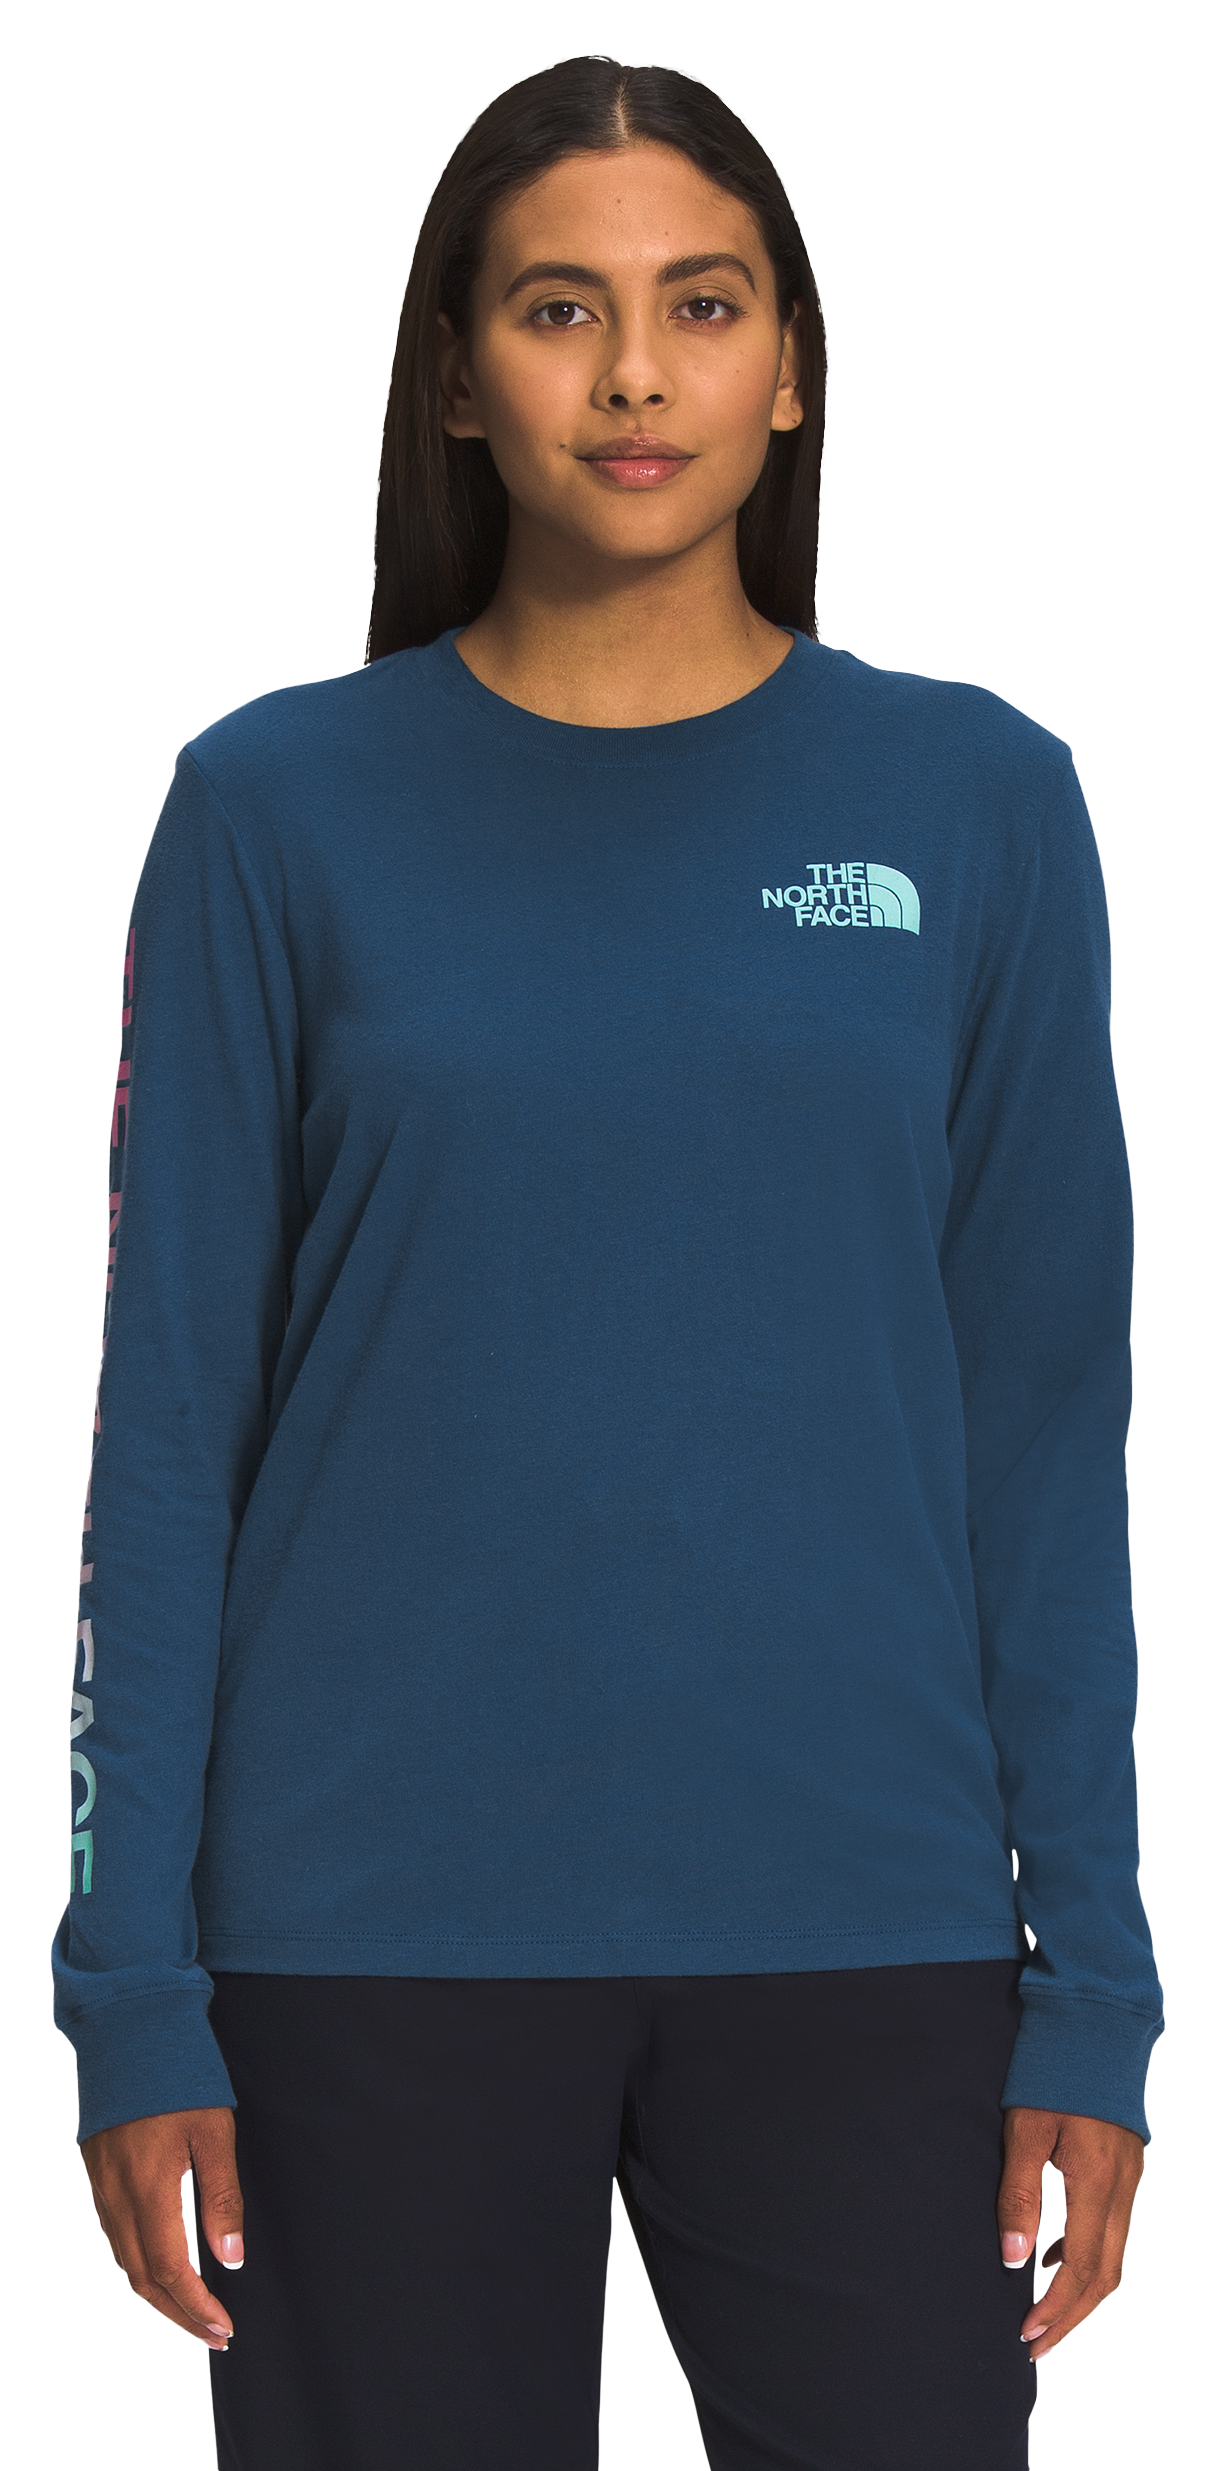 The North Face Brand Proud Long-Sleeve Shirt for Ladies - Shady Blue/Ombre Graphic - XL